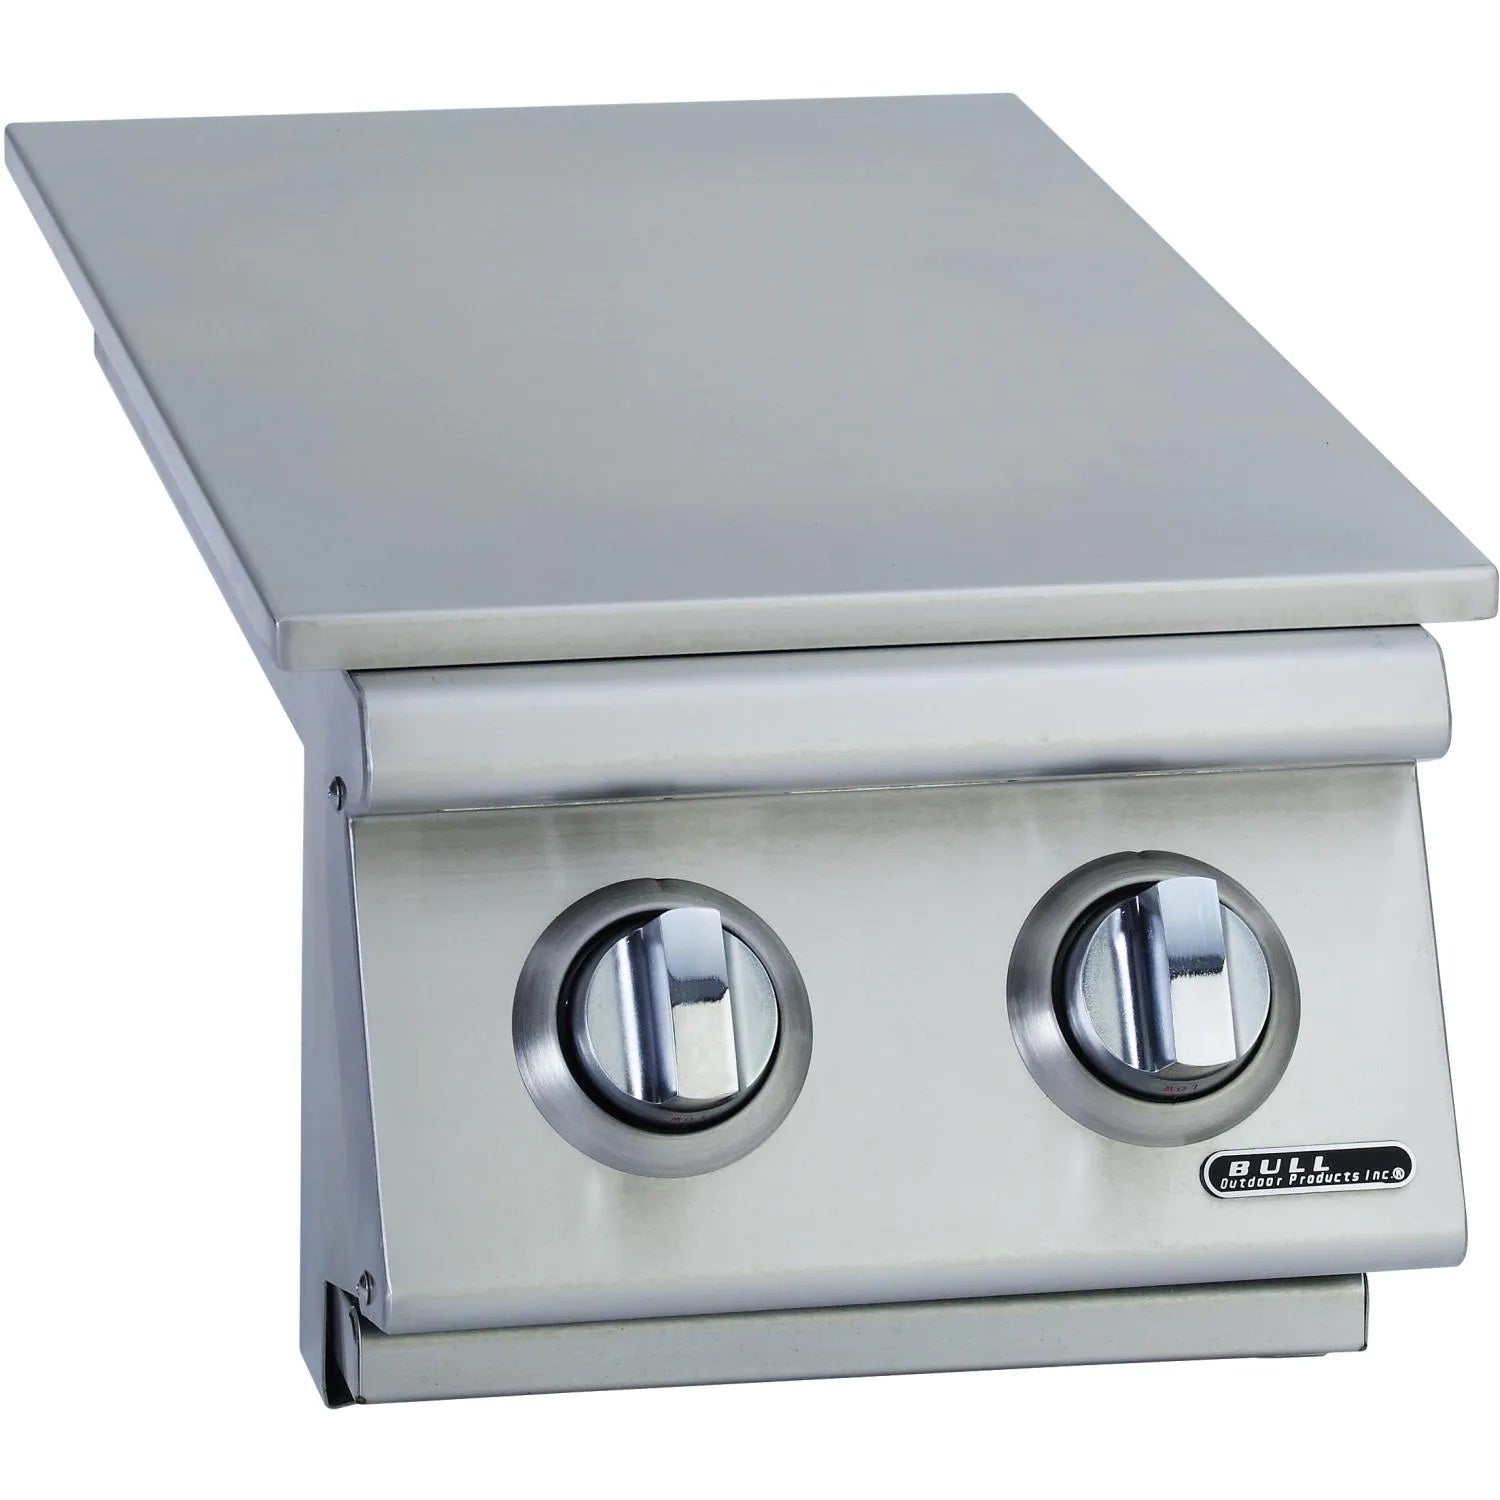 Bull Built-In Natural Gas Double Side Burner W/ Stainless 